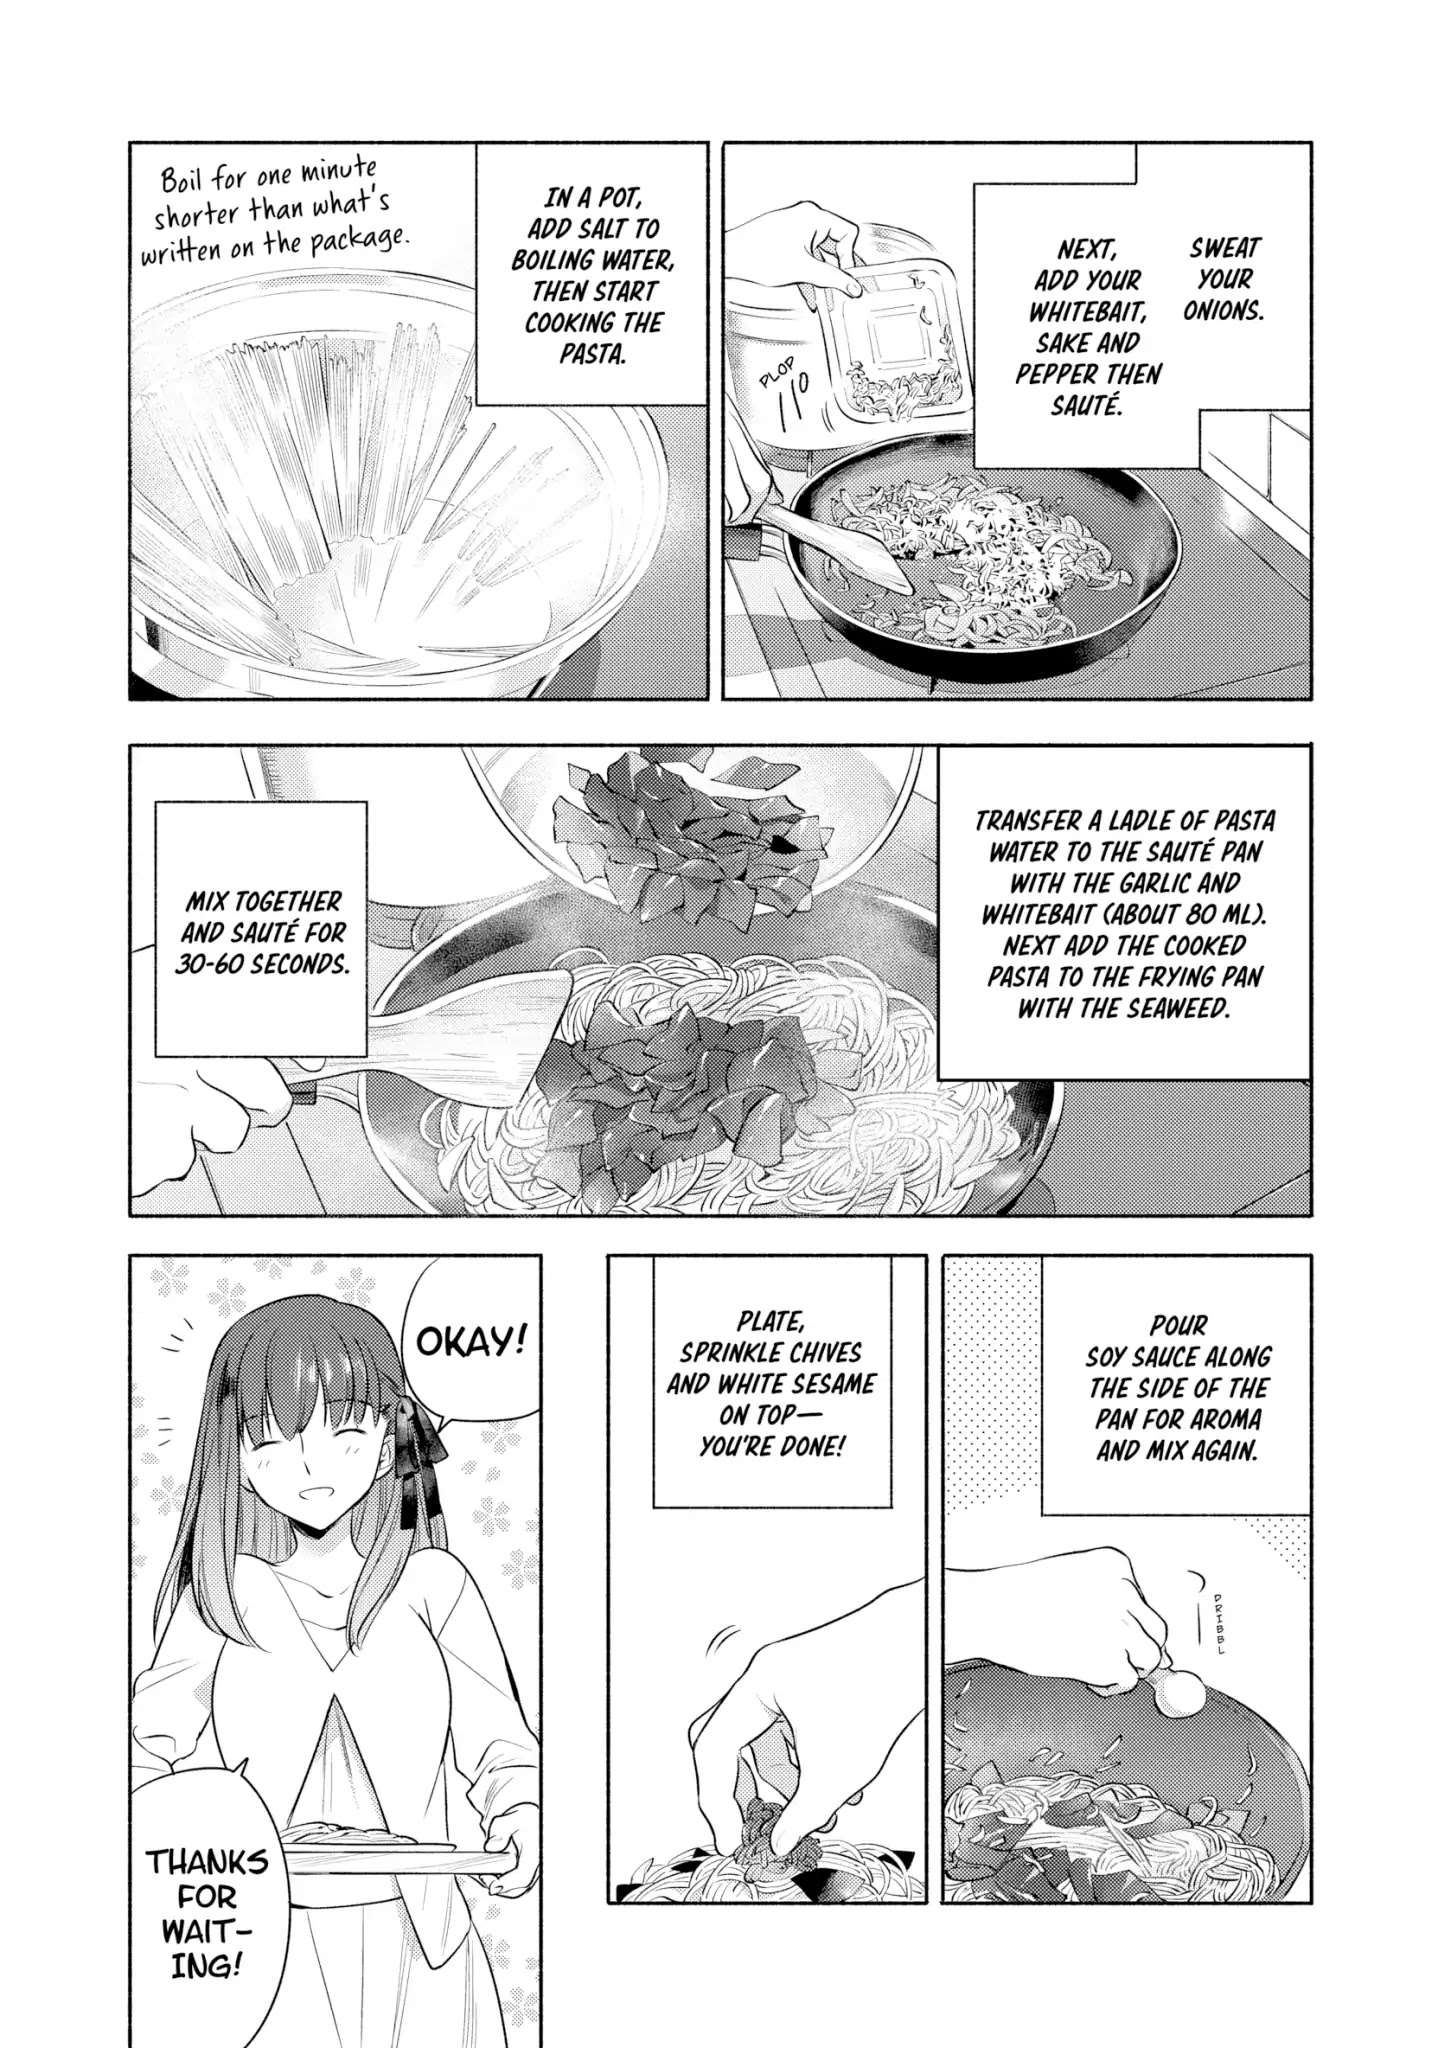 What's Cooking at the Emiya House Today? Chapter 13: Raw Seaweed and Whitebait Pasta